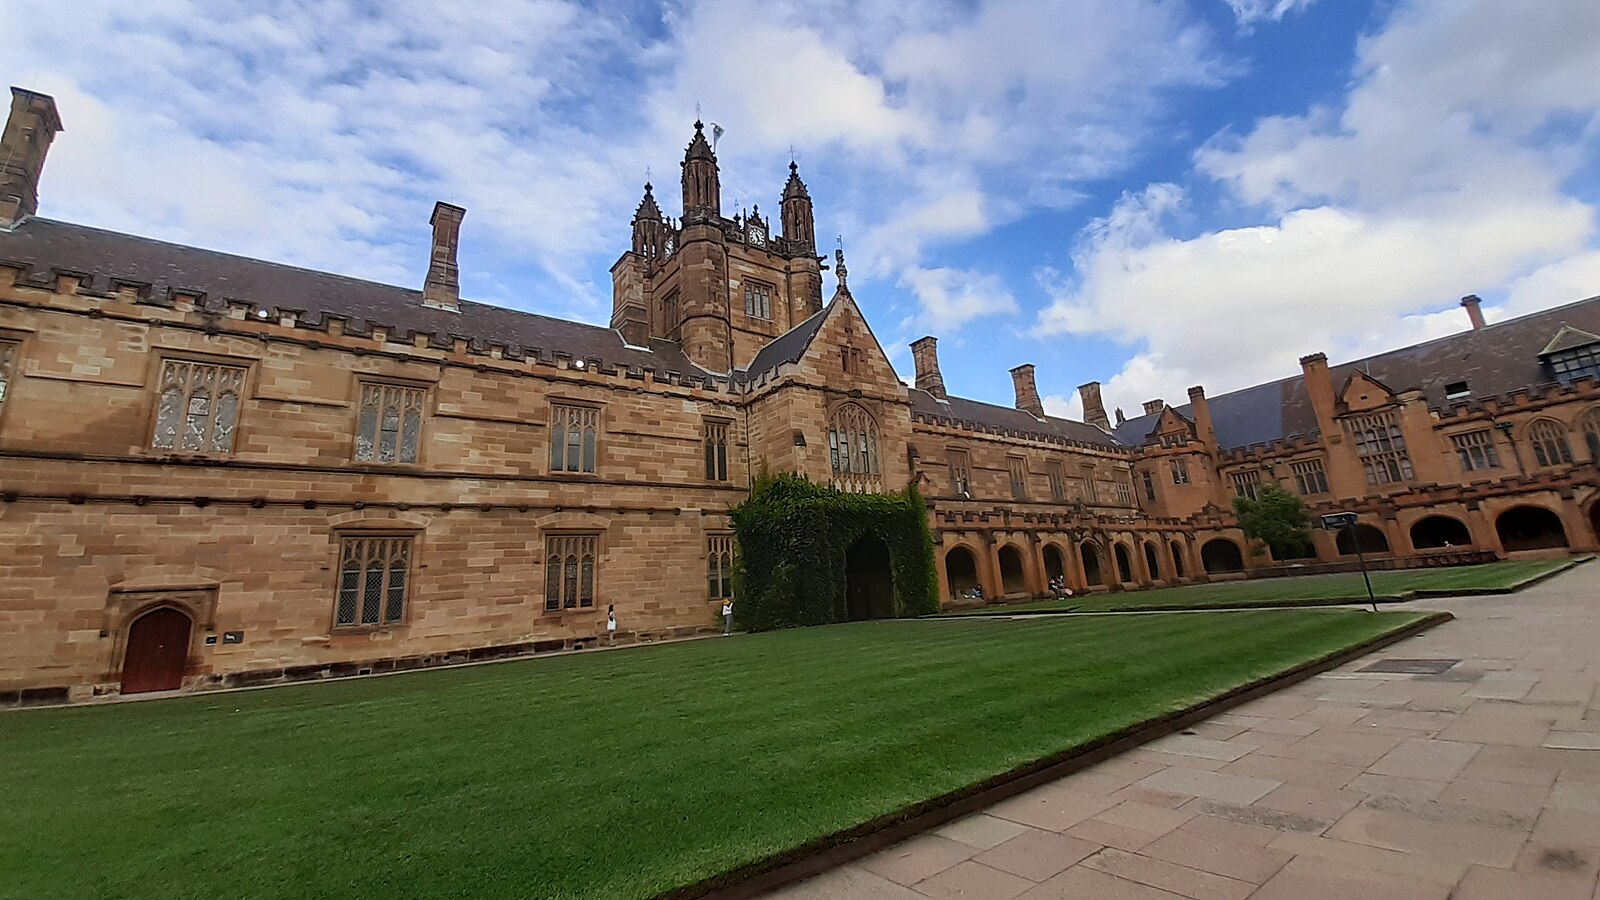 University of Sydney cracks down on students’ right to protest